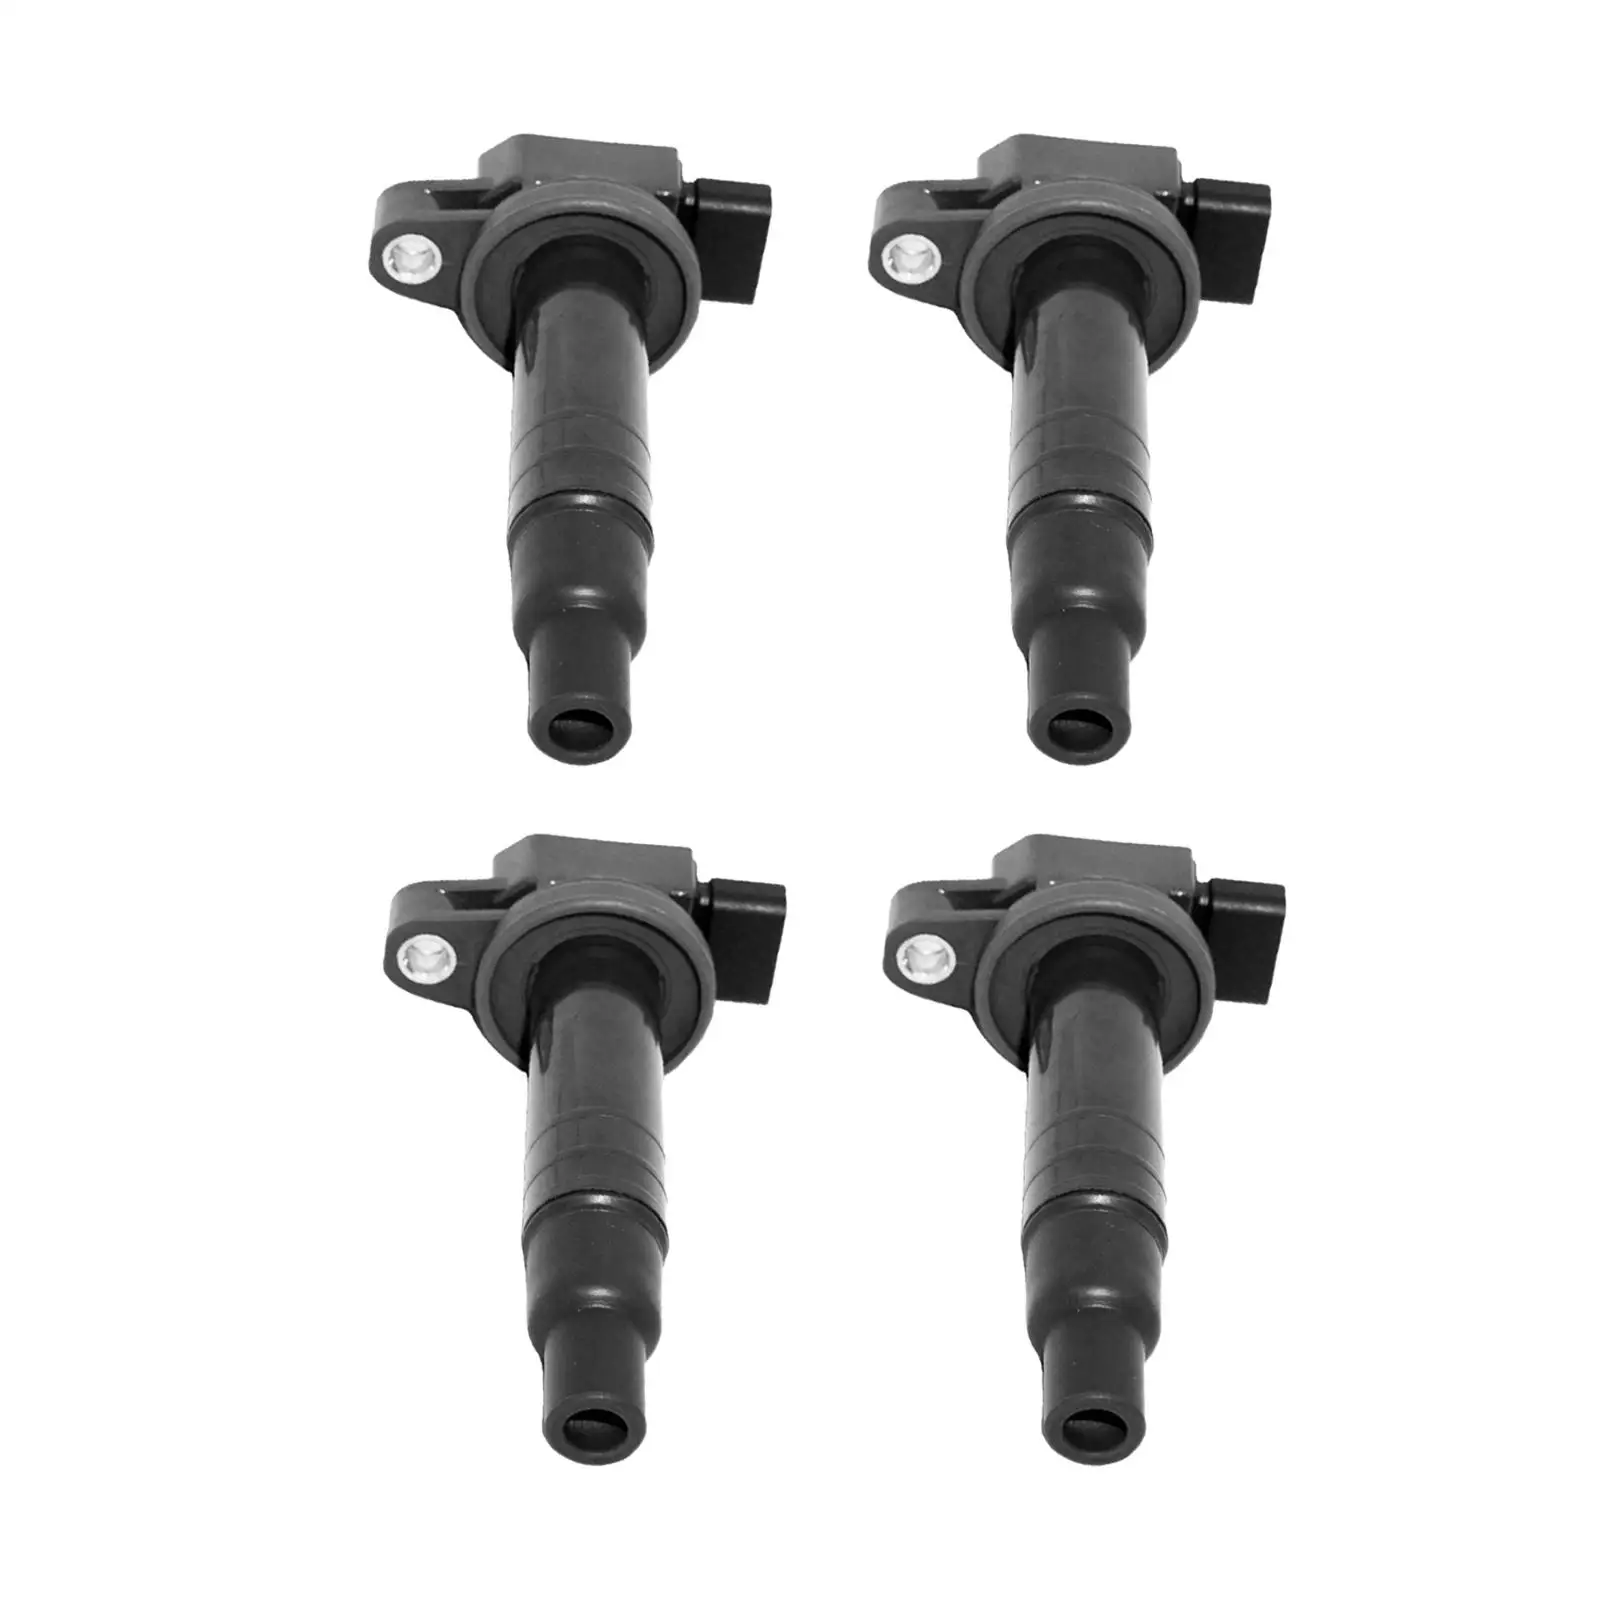 4x Ignition Coils 90919-02240 Professional for Toyota 1.5L Yaris for prius